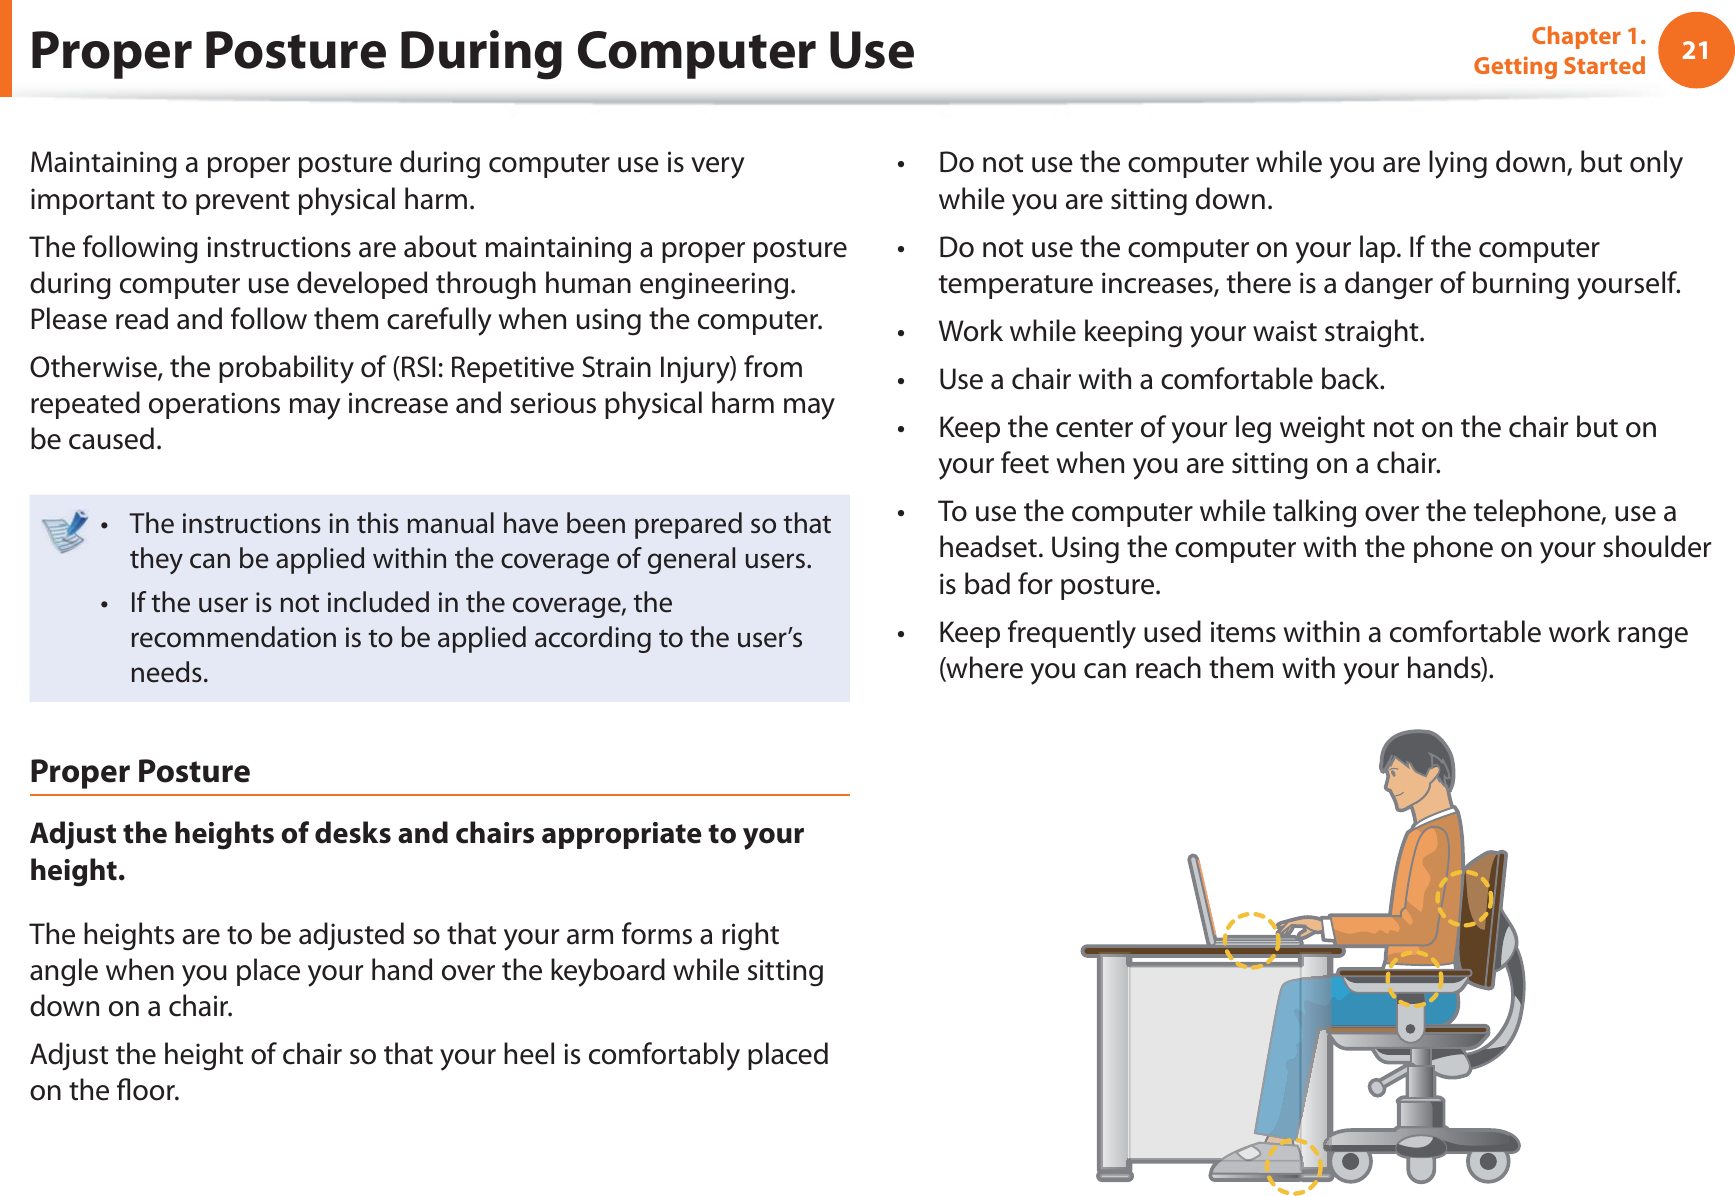 21Chapter 1. Getting StartedProper Posture During Computer UseMaintaining a proper posture during computer use is very important to prevent physical harm.The following instructions are about maintaining a proper posture during computer use developed through human engineering. Please read and follow them carefully when using the computer.Otherwise, the probability of (RSI: Repetitive Strain Injury) from repeated operations may increase and serious physical harm may be caused.The instructions in this manual have been prepared so that t they can be applied within the coverage of general users. If the user is not included in the coverage, the t recommendation is to be applied according to the user’s needs.Proper PostureAdjust the heights of desks and chairs appropriate to your height.The heights are to be adjusted so that your arm forms a right angle when you place your hand over the keyboard while sitting down on a chair.Adjust the height of chair so that your heel is comfortably placed on the ﬂ oor.Do not use the computer while you are lying down, but only t while you are sitting down.Do not use the computer on your lap. If the computer t temperature increases, there is a danger of burning yourself.Work while keeping your waist straight.t Use a chair with a comfortable back.t Keep the center of your leg weight not on the chair but on t your feet when you are sitting on a chair.To use the computer while talking over the telephone, use a t headset. Using the computer with the phone on your shoulder is bad for posture.Keep frequently used items within a comfortable work range t (where you can reach them with your hands).